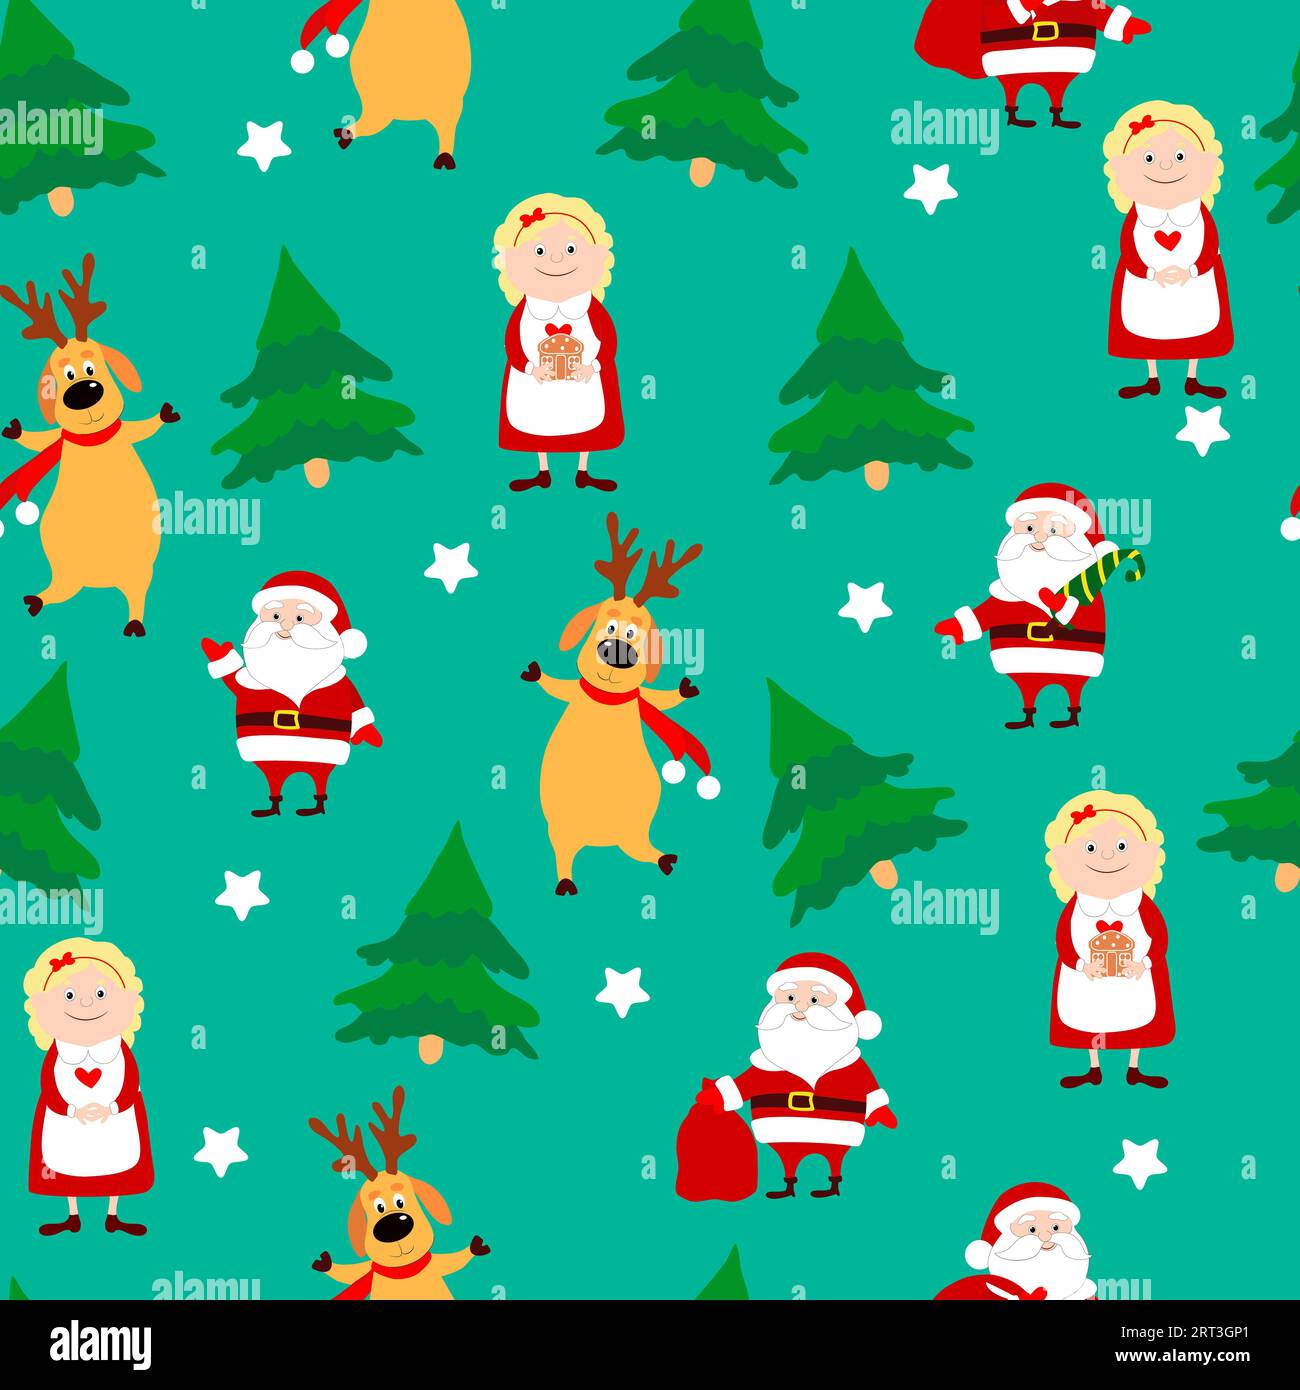 Very positive Christmas seamless pattern on a green background. Santa Claus, Mrs Santa Claus, deer and many trees. Vector cheerful illustration. Stock Vector